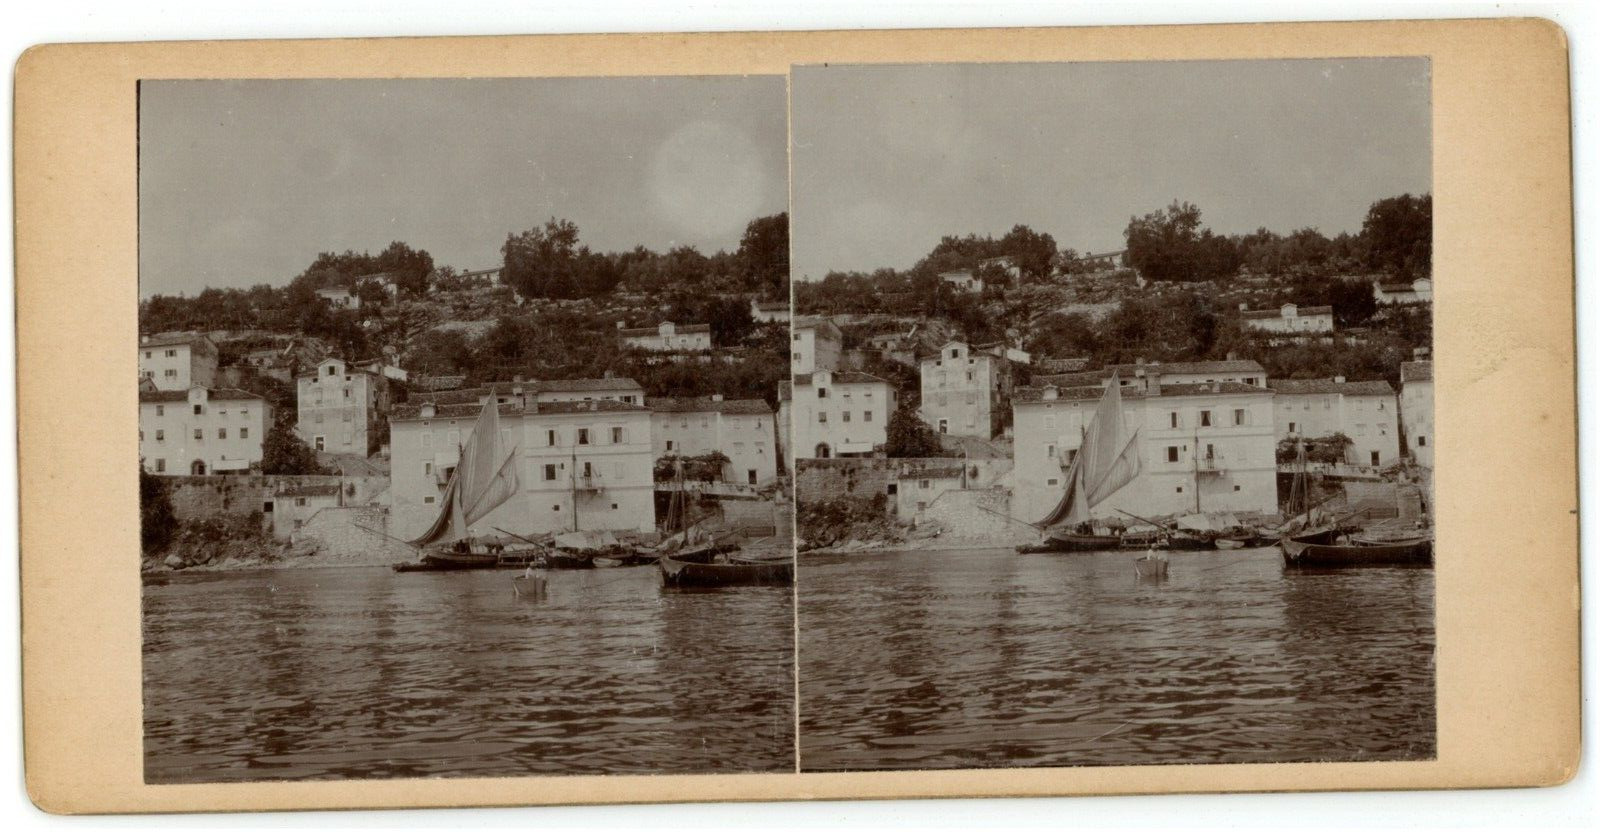 c1890's Real Photo Stereoview Card Featuring Boat and Village in Mediterranean